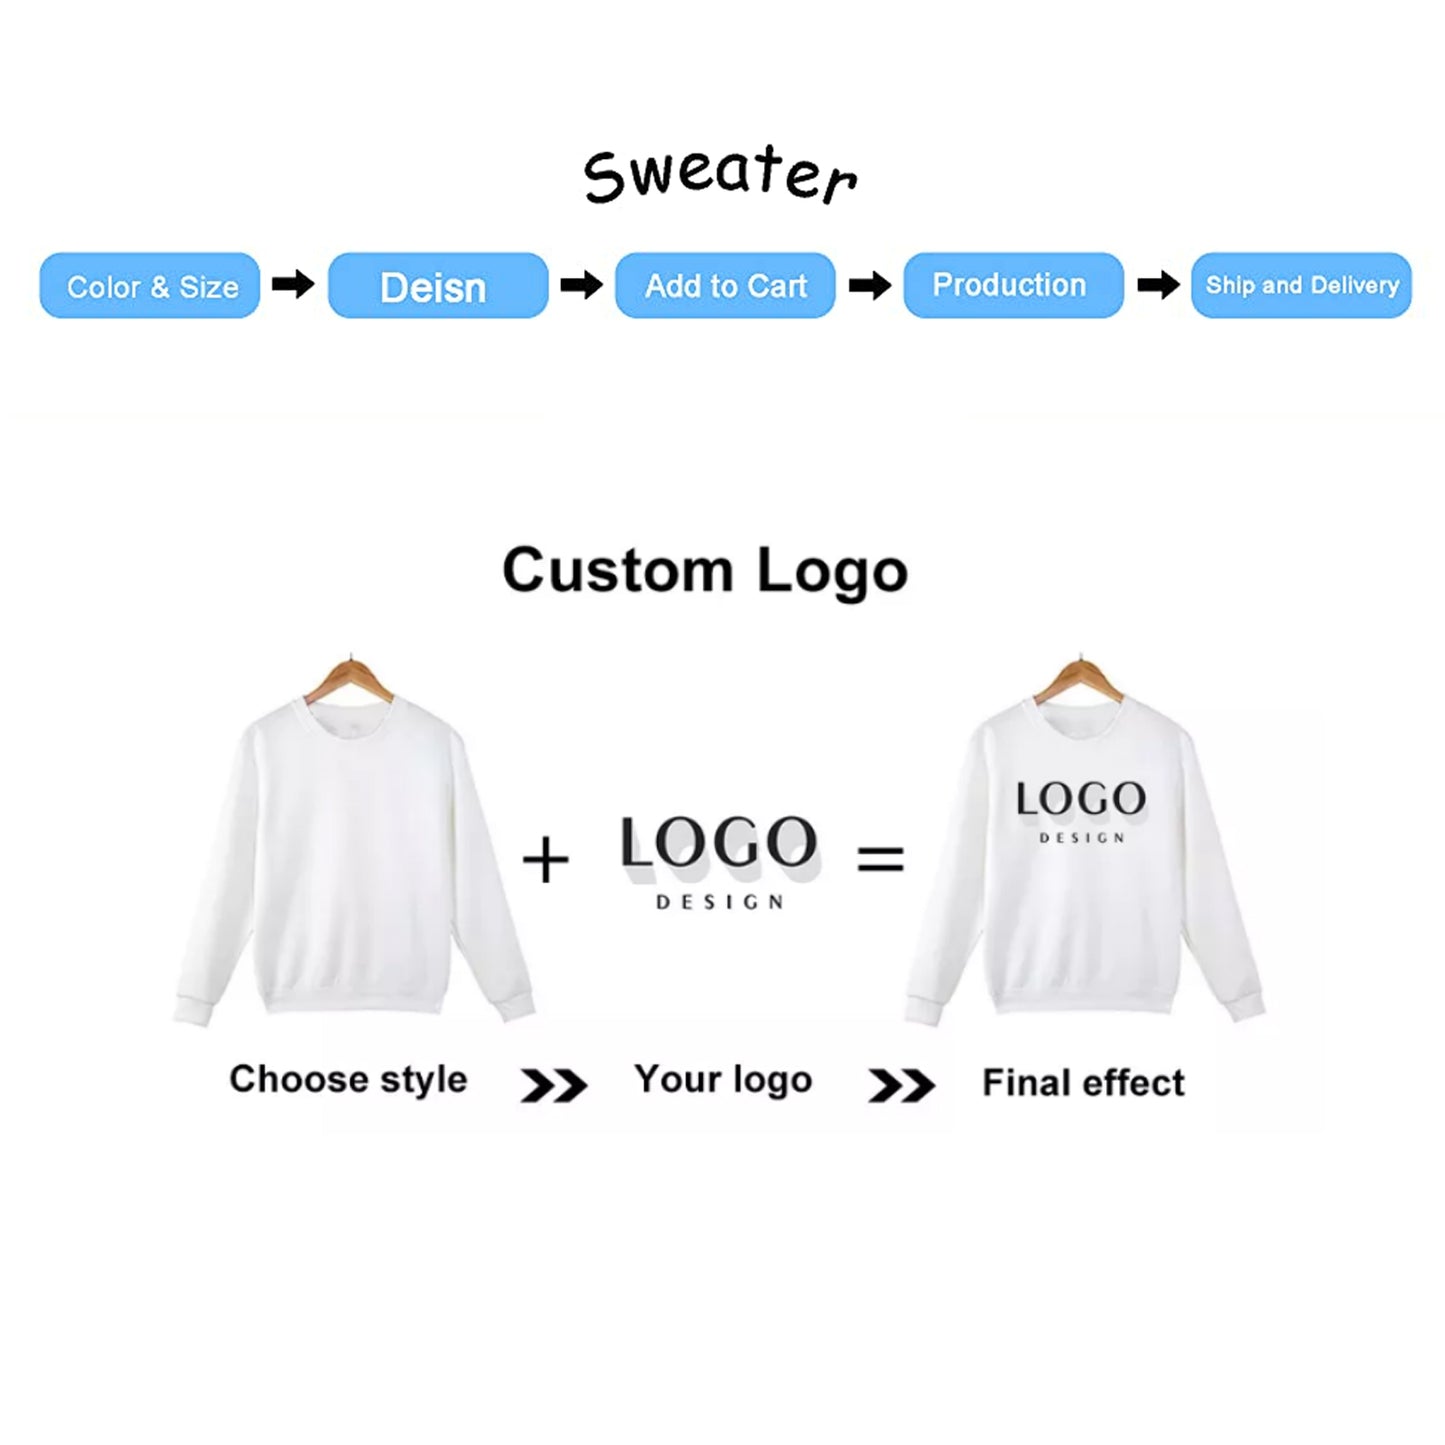 Custom Hoodies Design Your Own Personalized Photo Text 5 Sides Print -10900